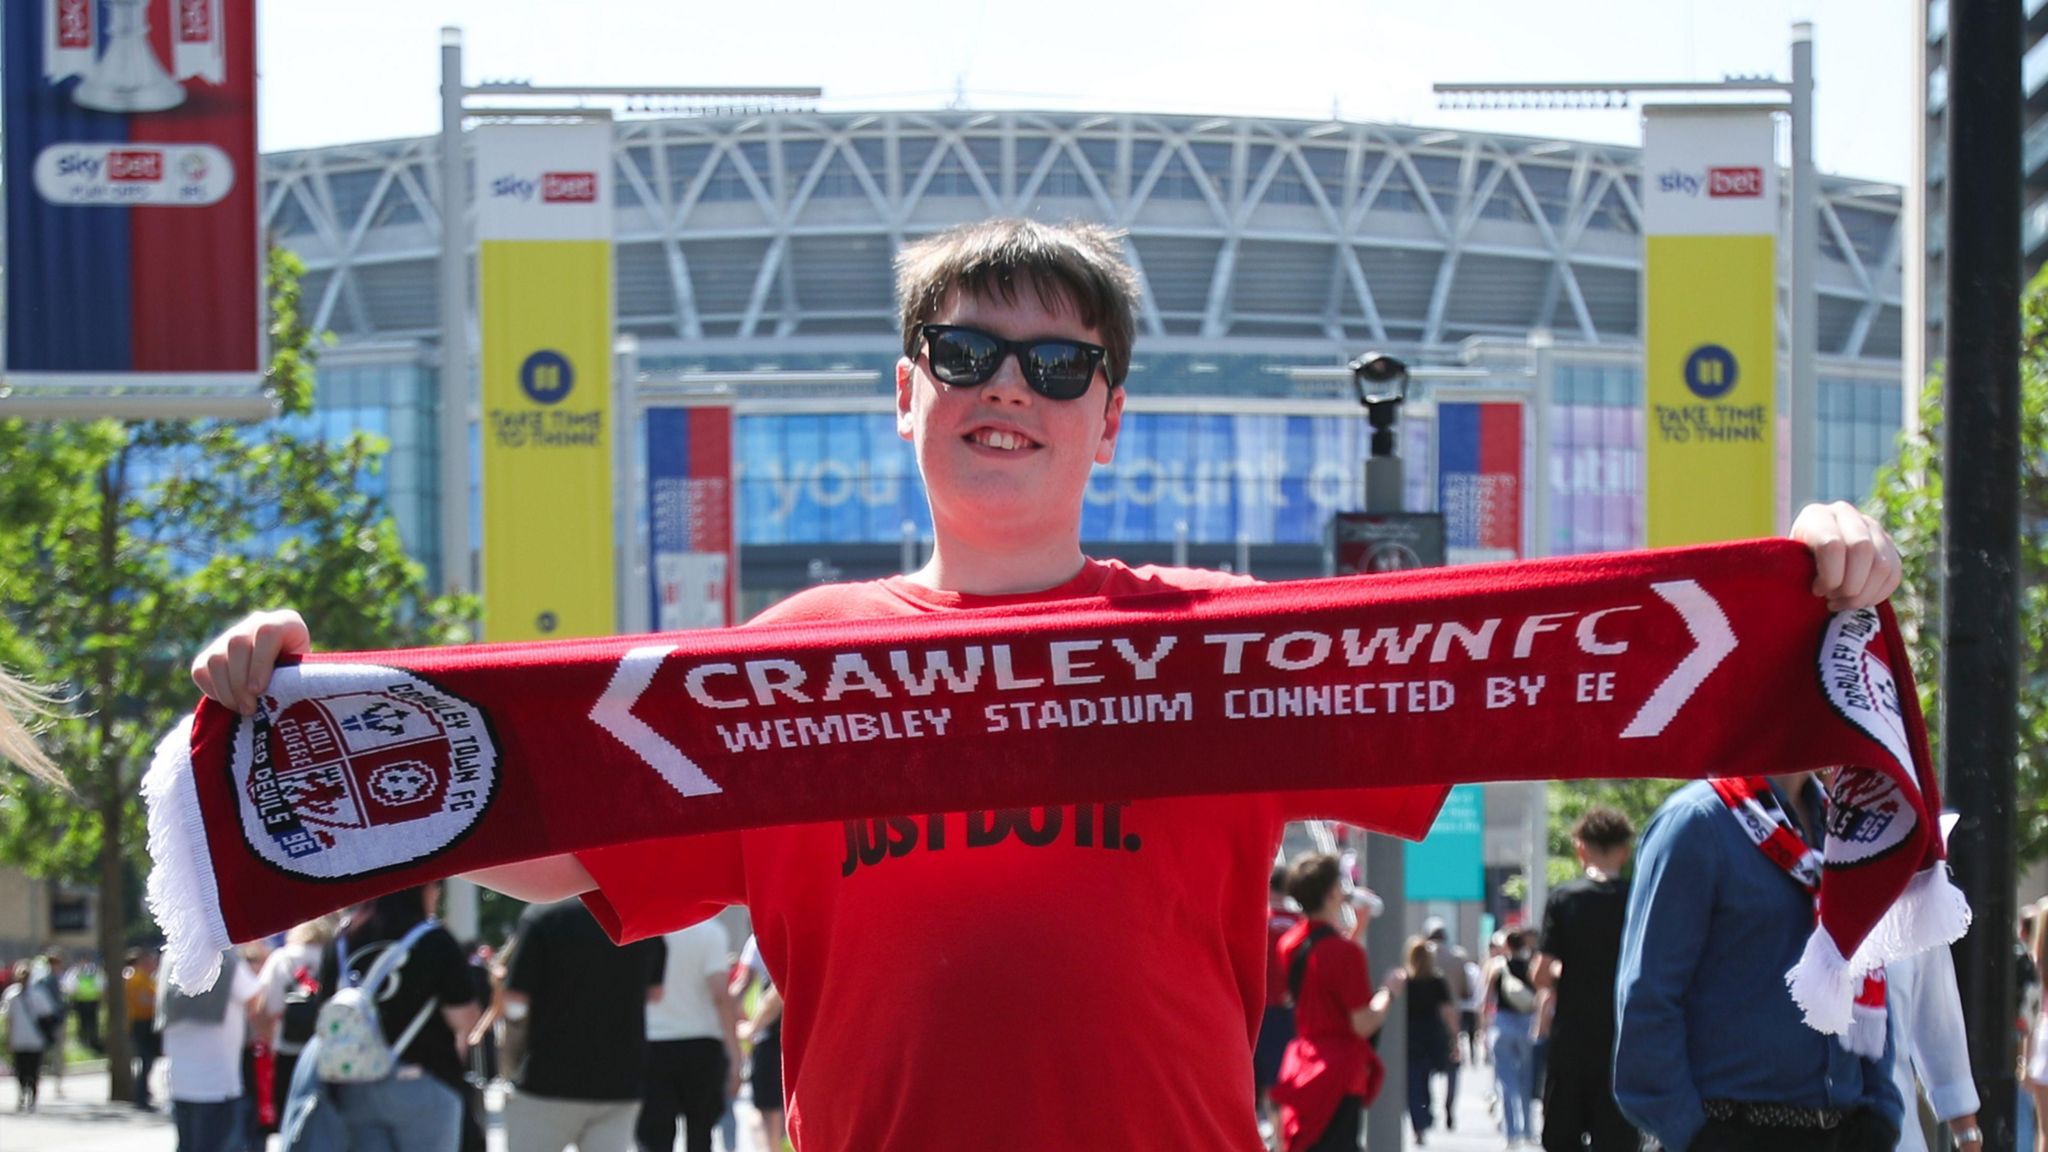 A boy with brown hair holding a Crawley Town scarf